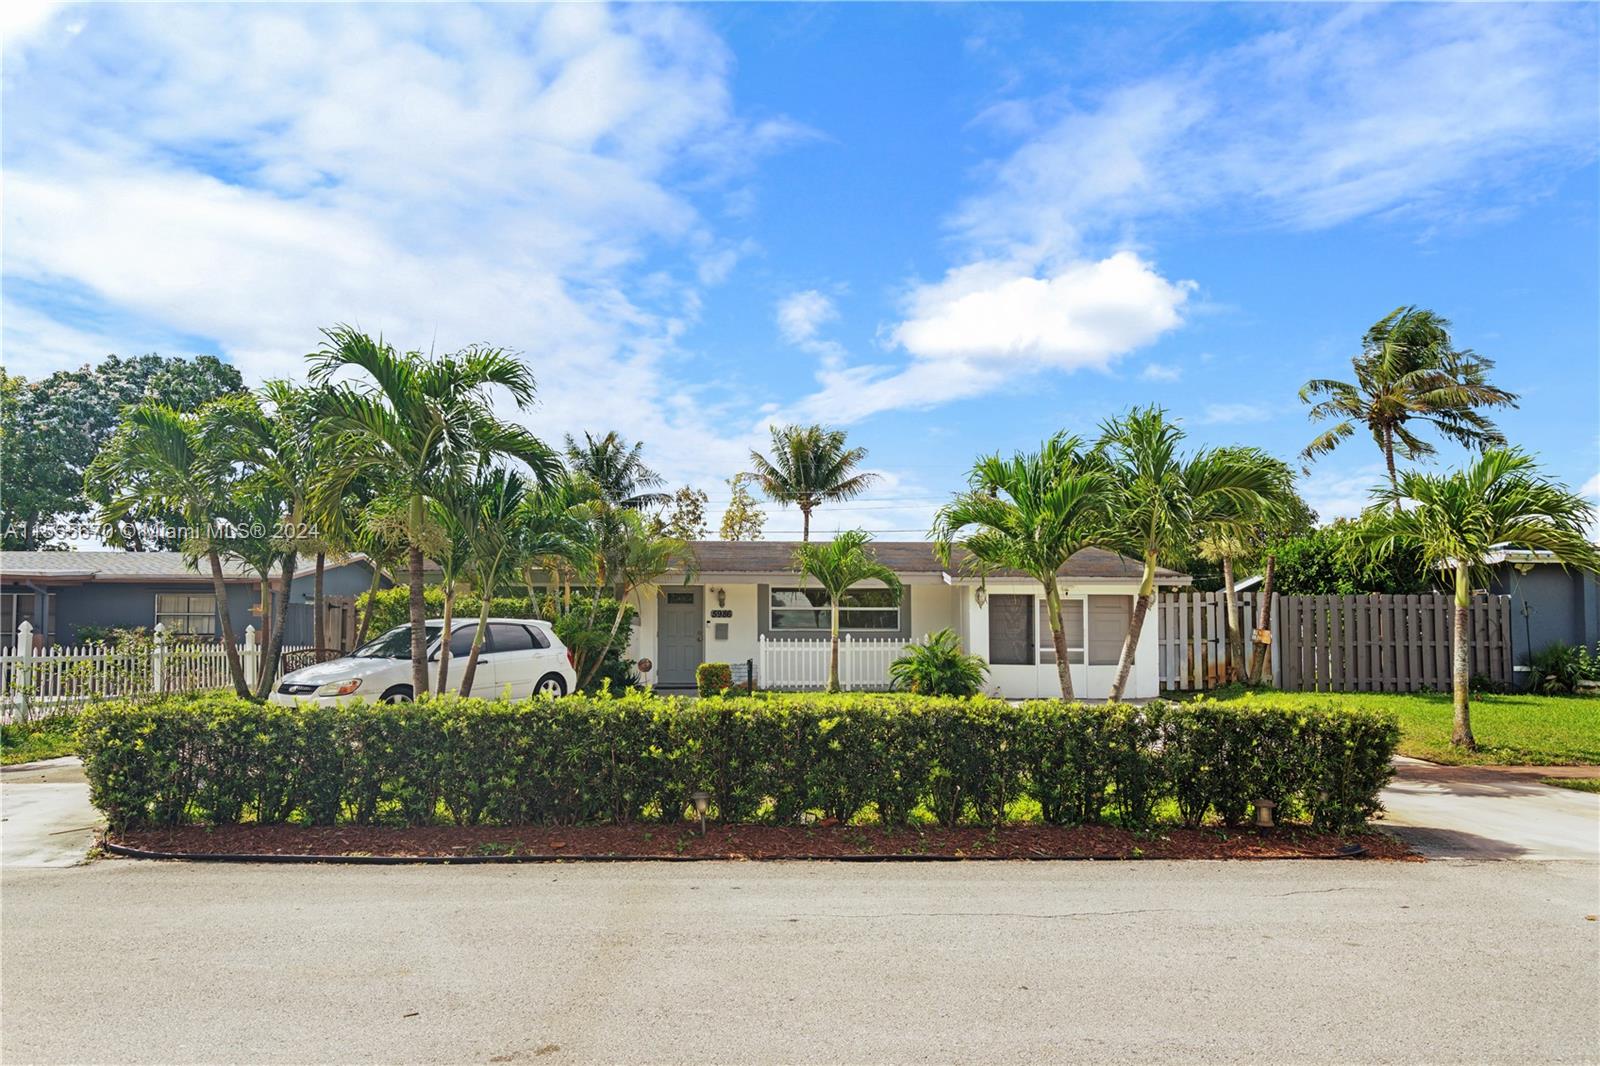 Property for Sale at 5986 Nw 16th St St, Sunrise, Miami-Dade County, Florida - Bedrooms: 3 
Bathrooms: 2  - $454,999